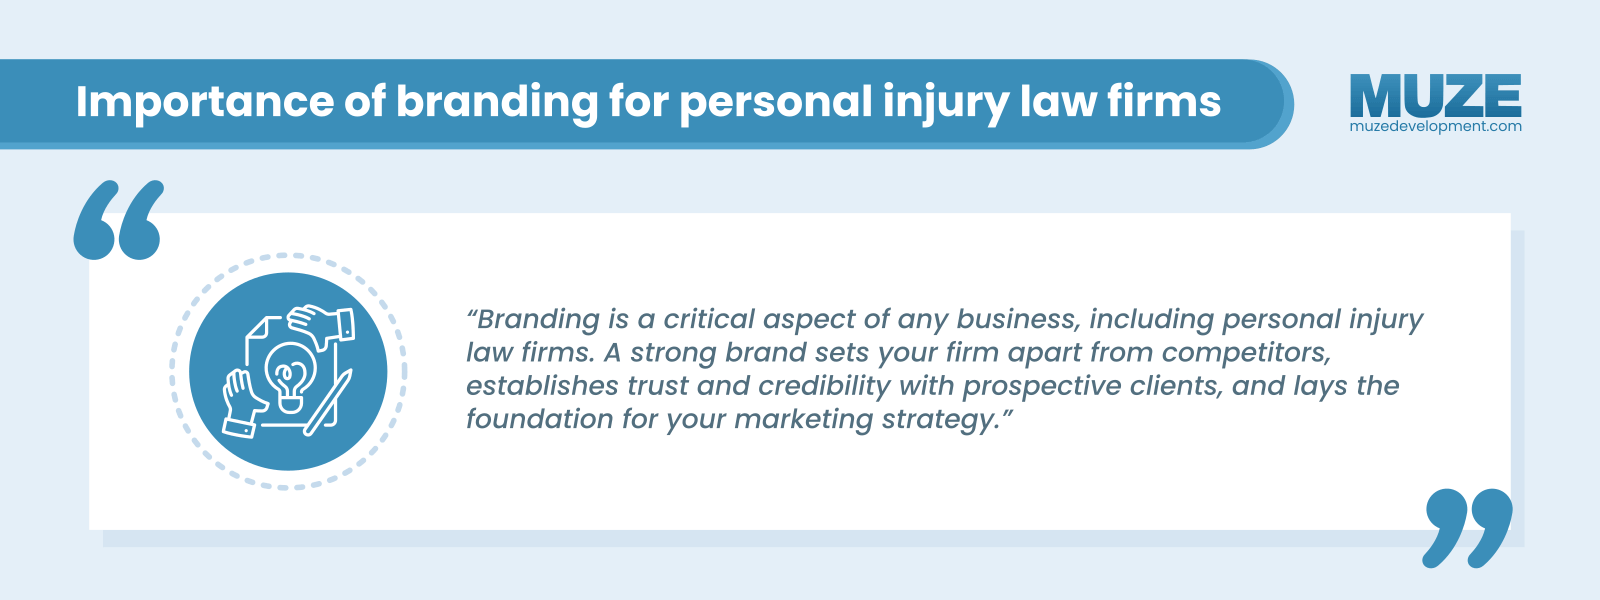 Importance of branding for personal injury law firms